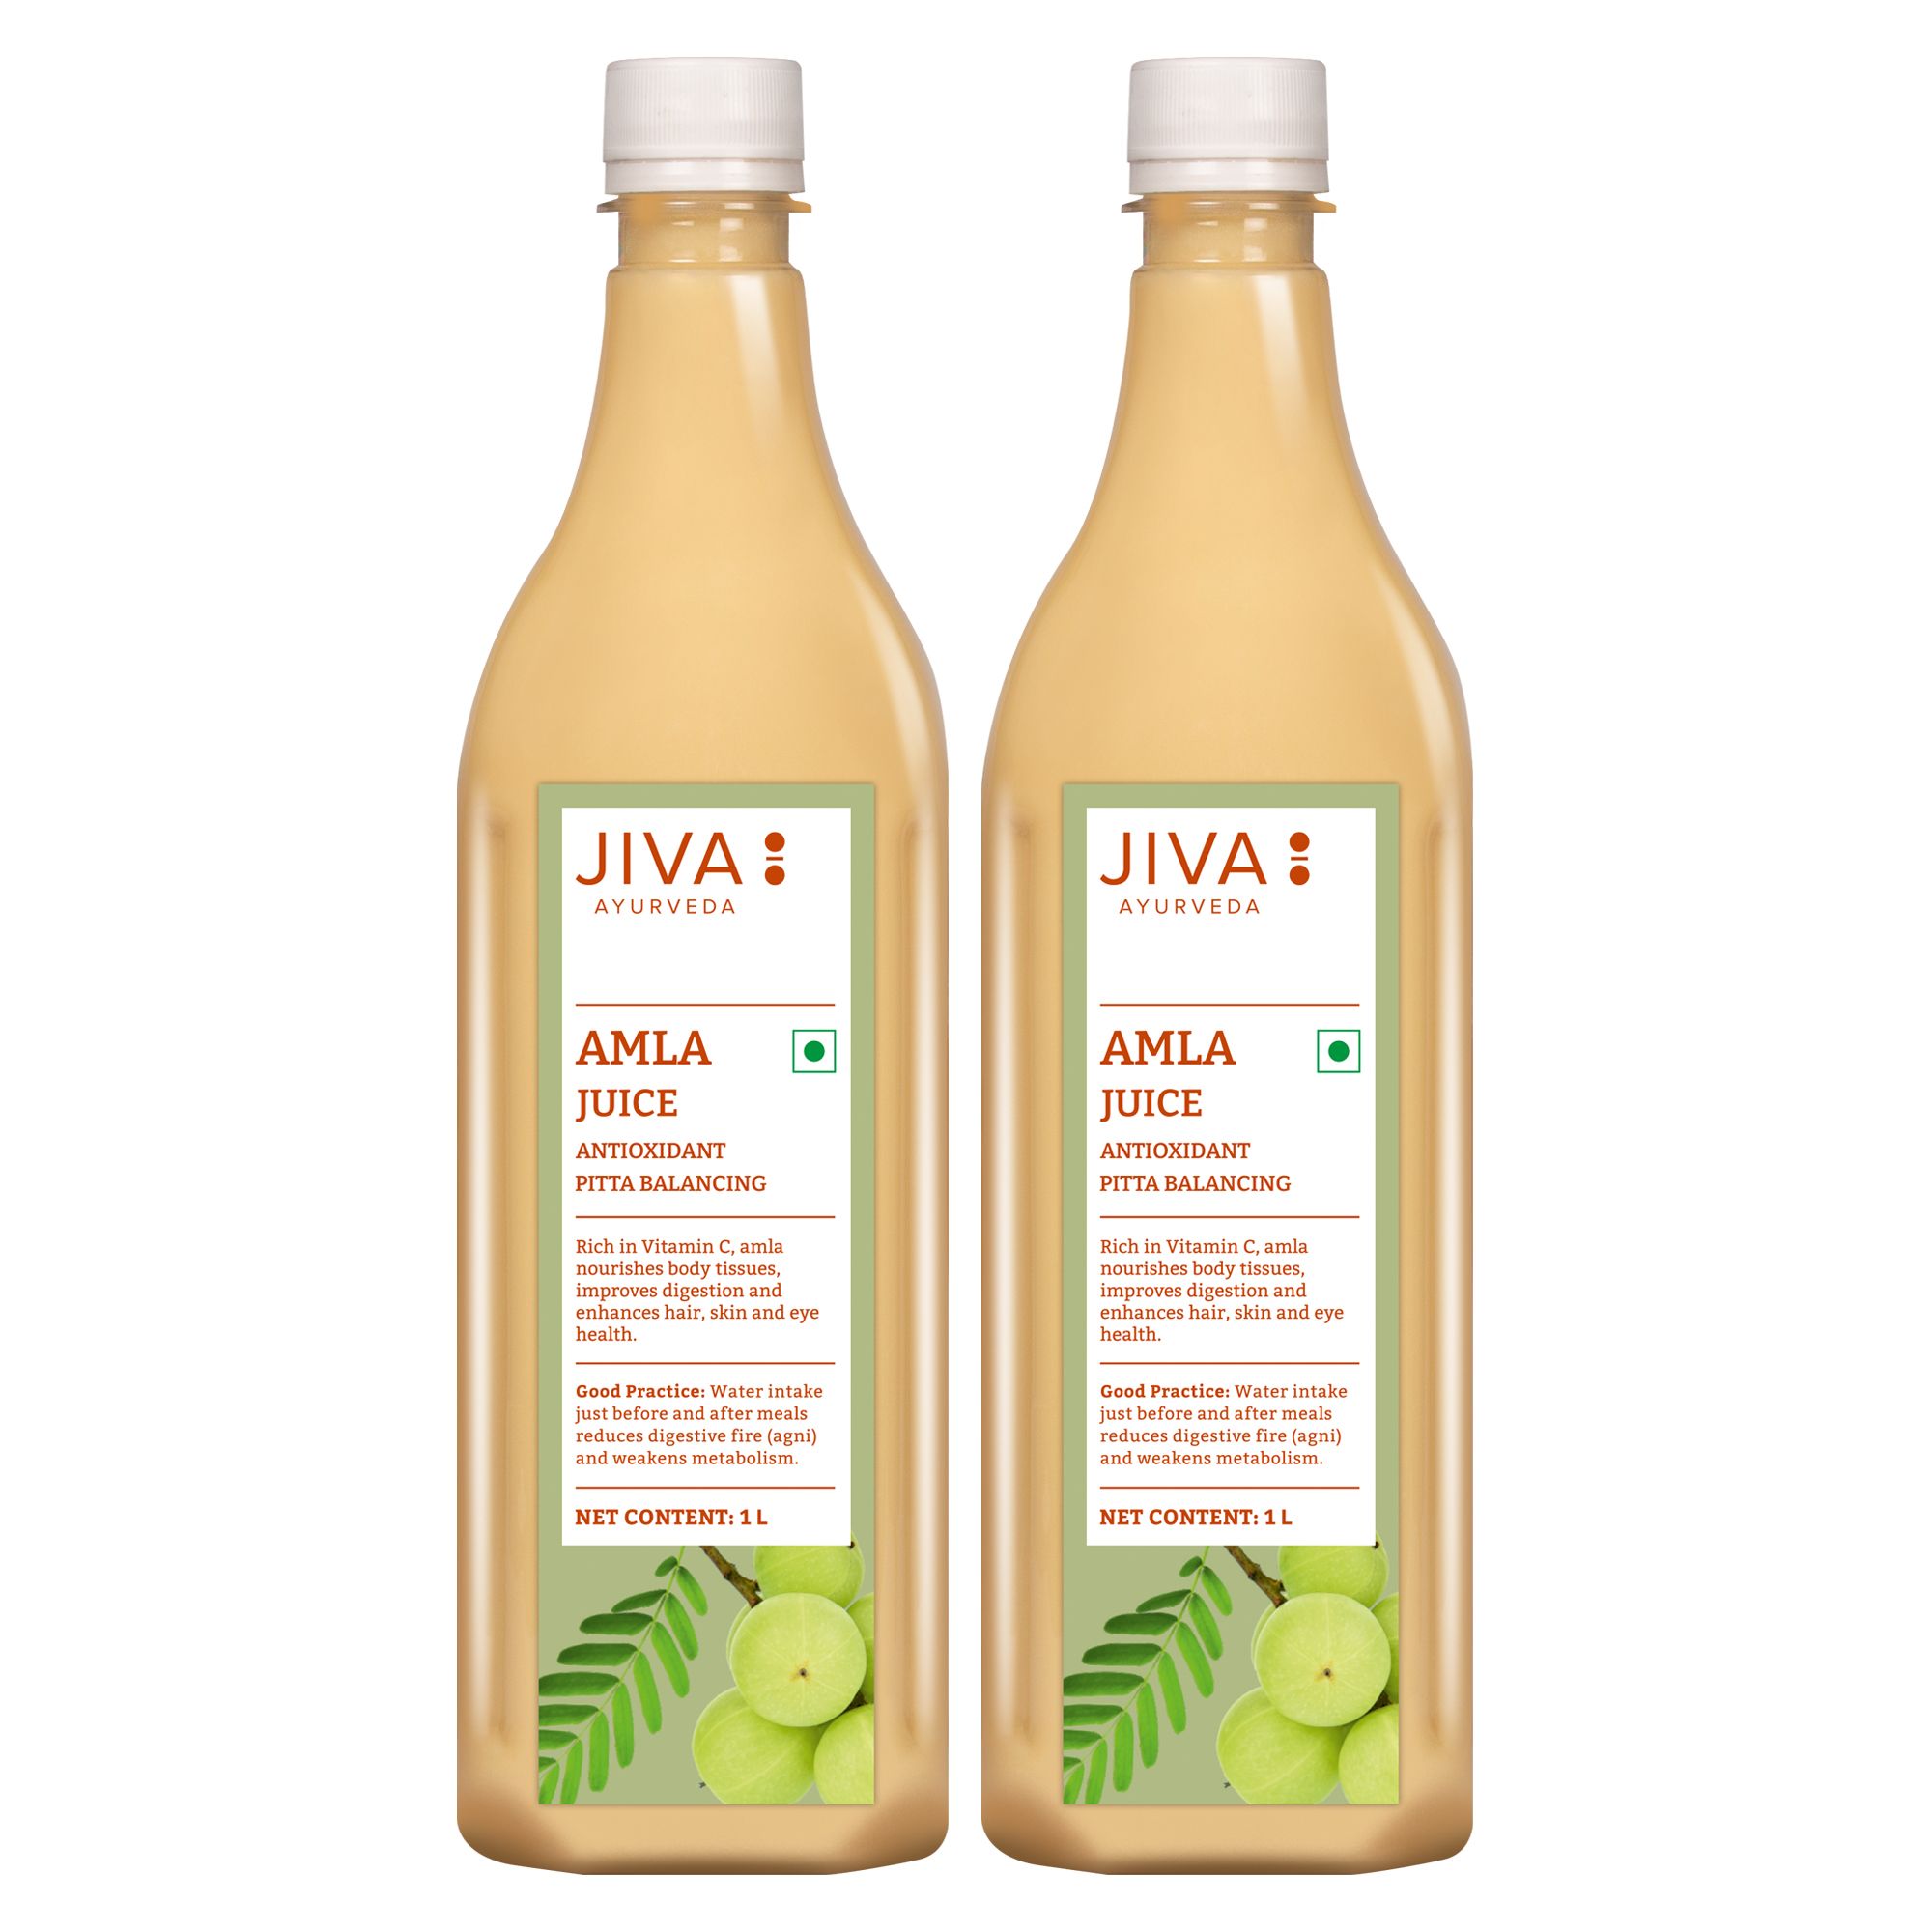 Jiva Amla Juice - 1 Litre - Pack of 2 - Made With Fresh Amla, Cold Pressed And No Artificial Flavours, Enriched with Antioxidants and Boosts Immunity.